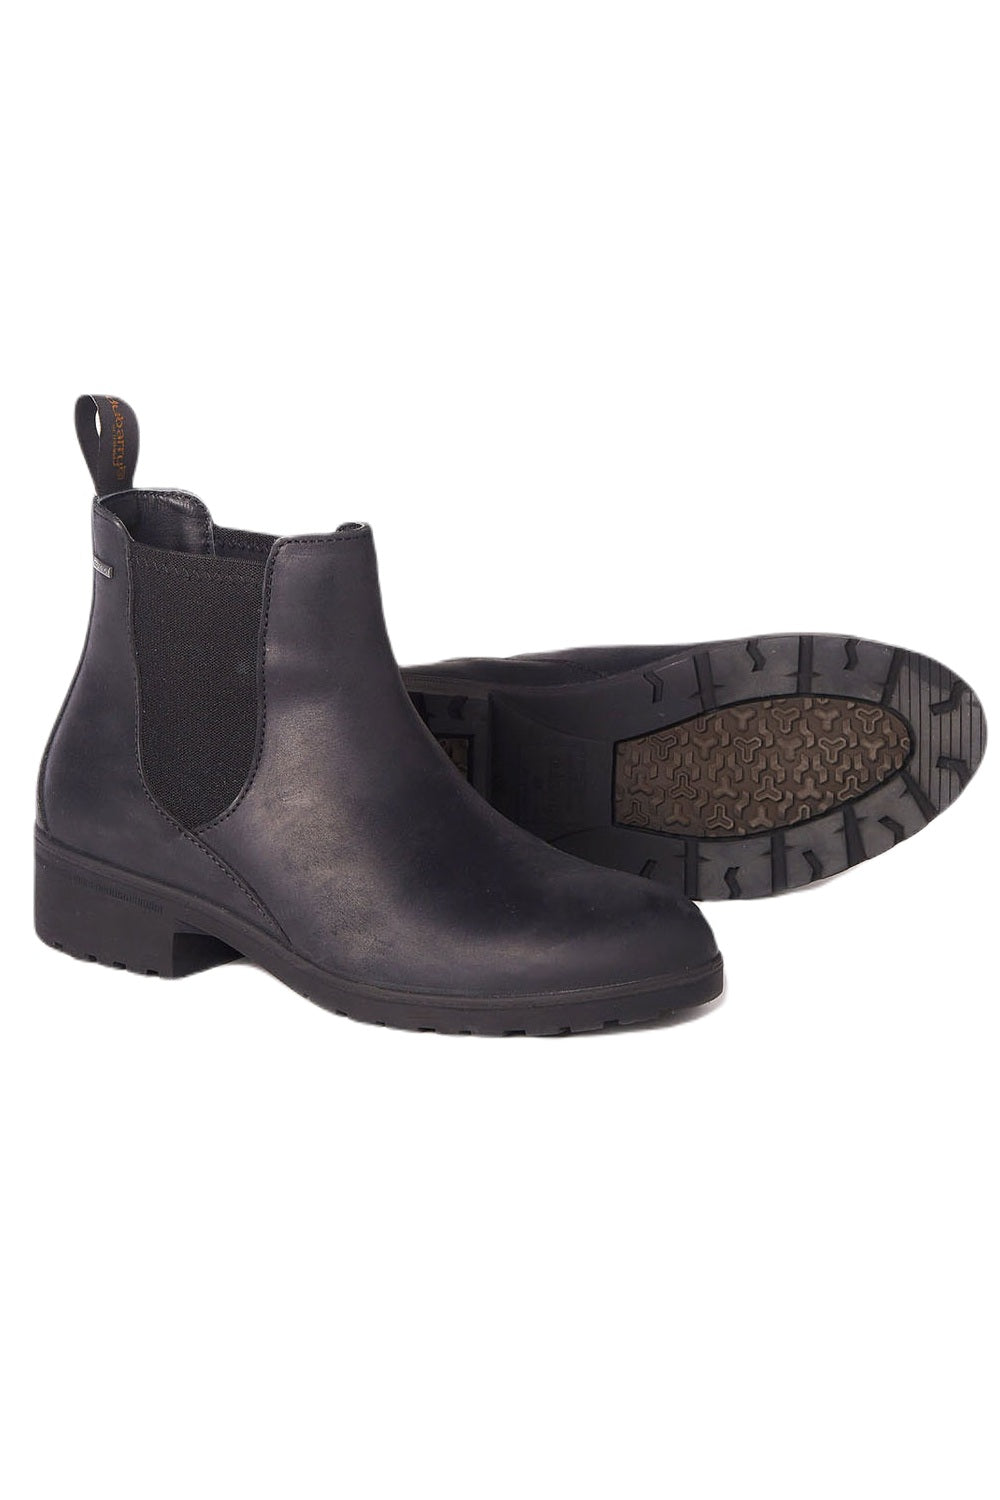 Dubarry Waterford Country Boots in Black 